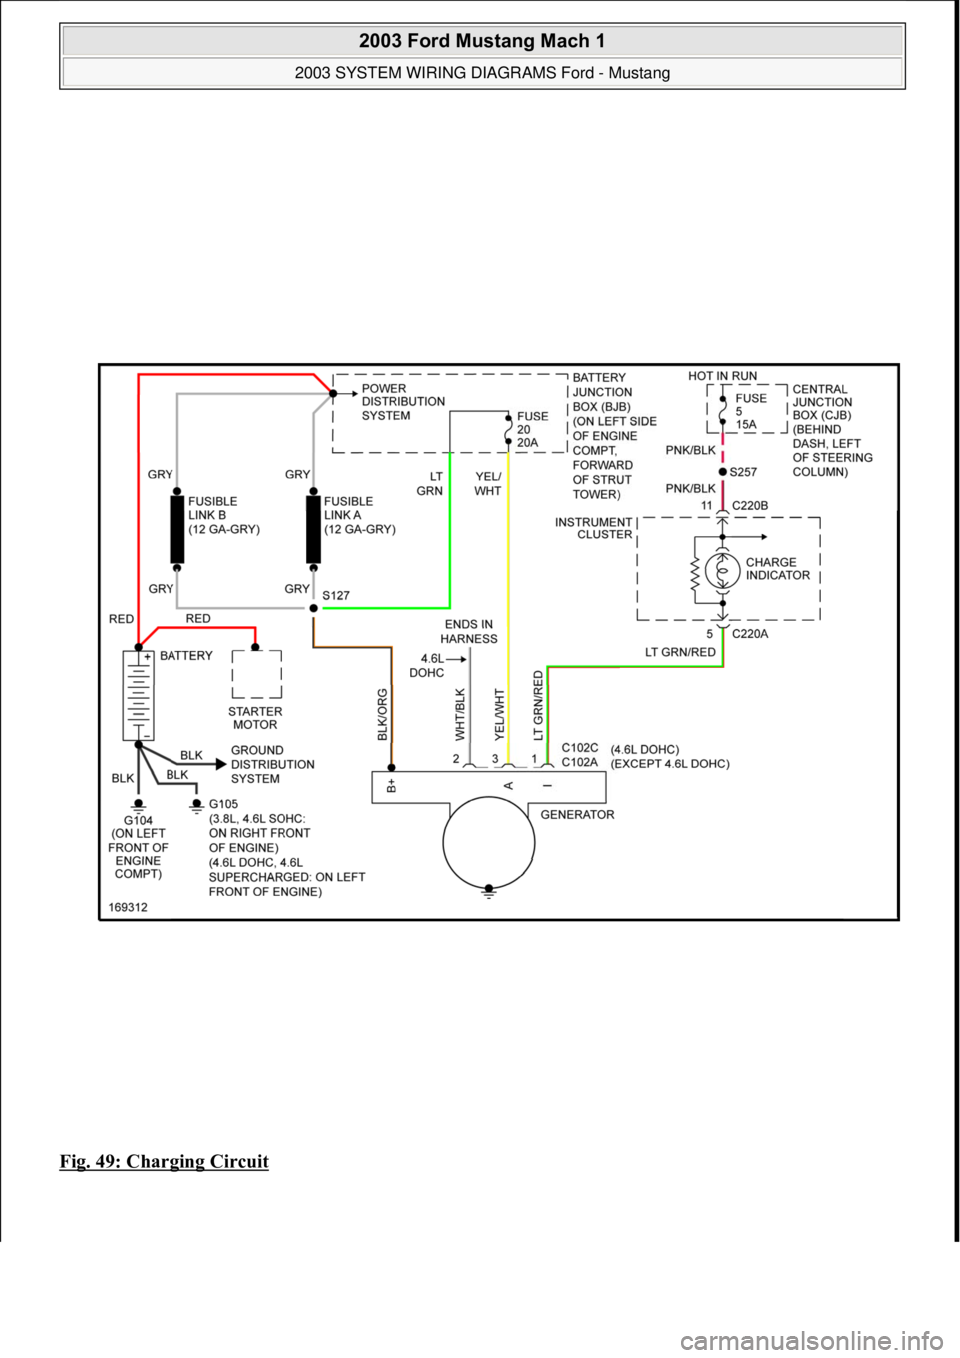 FORD MUSTANG 2003  Workshop Manual Fig. 49: Charging Circuit 
 
2003 Ford Mustang Mach 1 
2003 SYSTEM WIRING DIAGRAMS Ford - Mustang  
111  
18 ноября  2011 г. 12:54:33Page 50 © 2006 Mitchell Repair Information Company, LLC.  